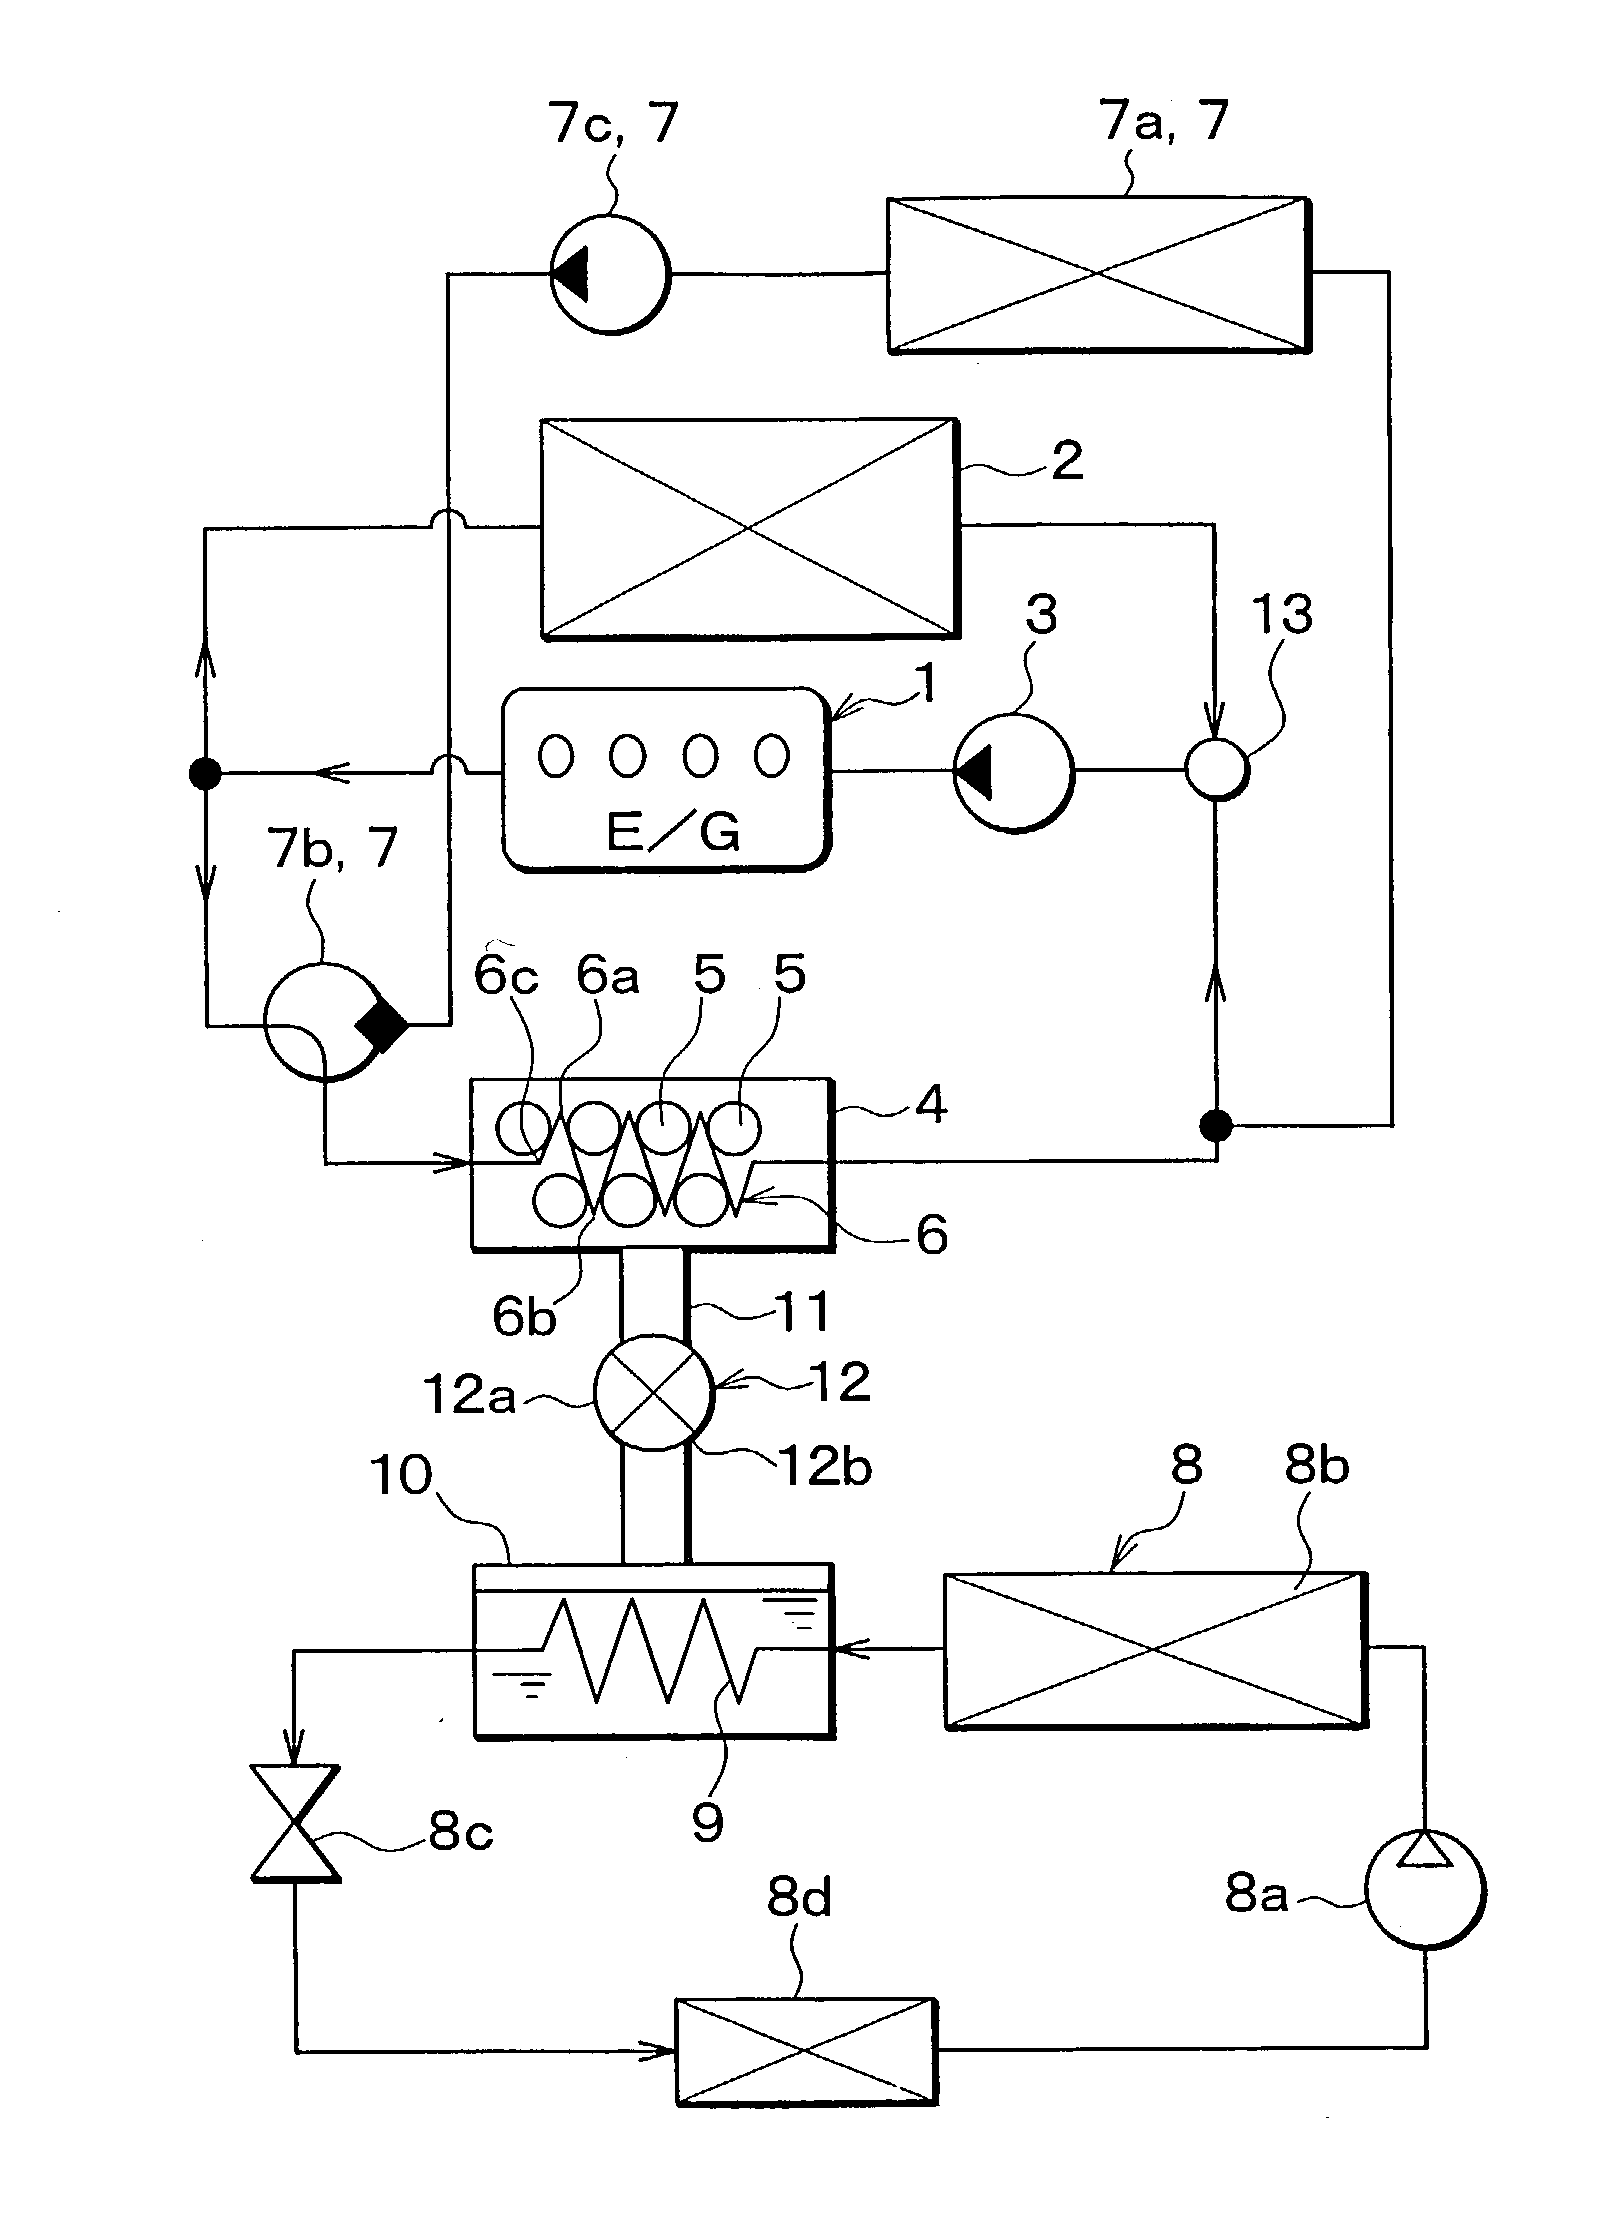 Heat storage system for vehicle, with adsorbent